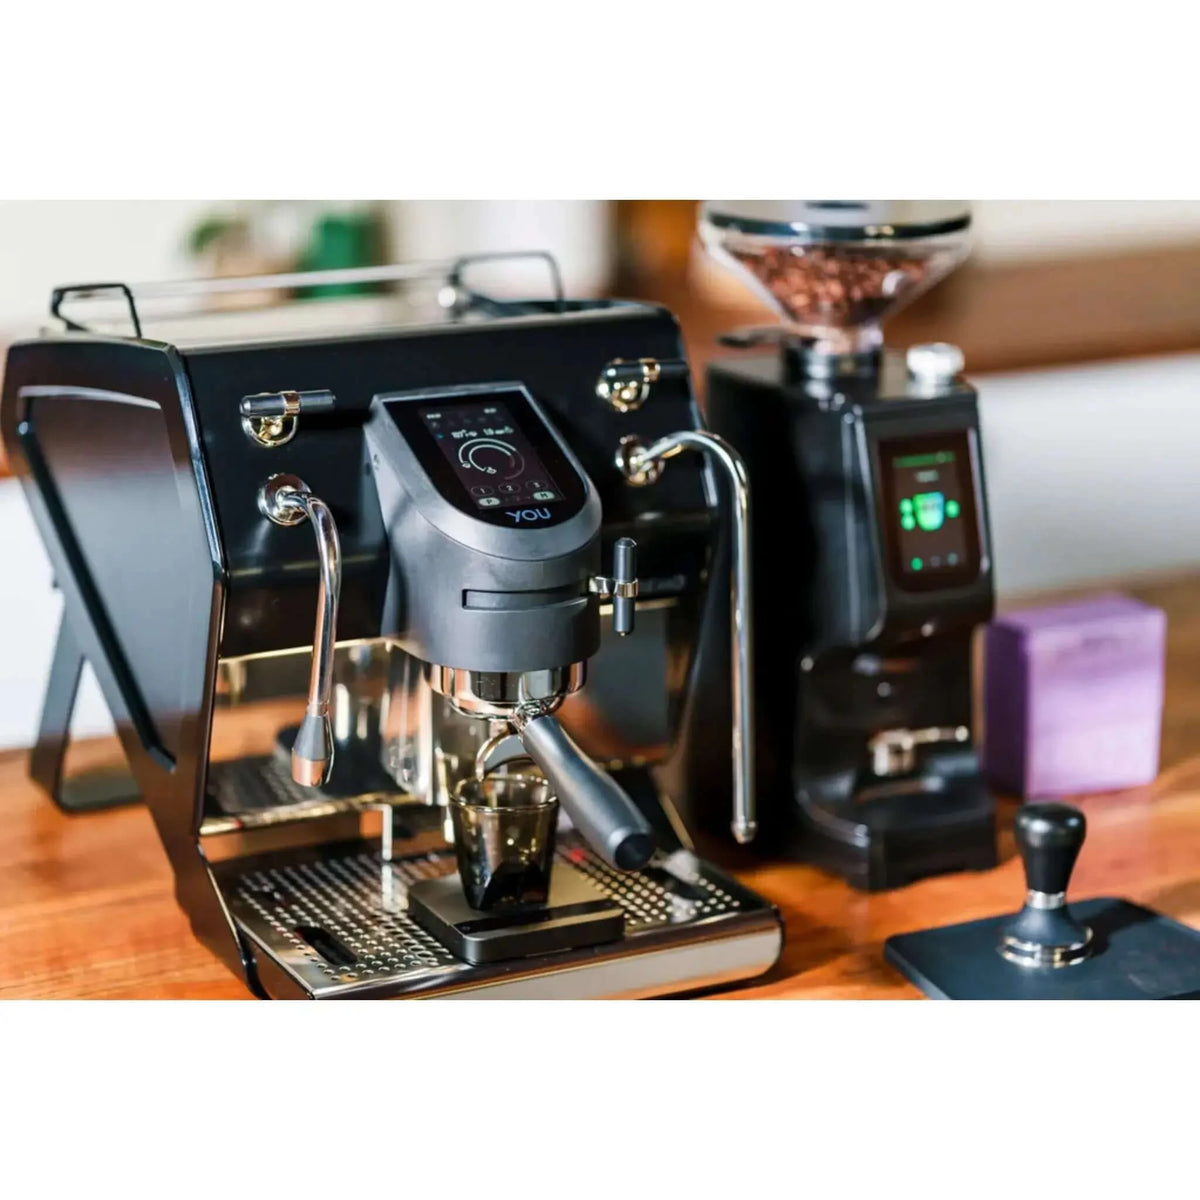 TRU All-in-One Espresso Maker with Grinder and Steam Wand